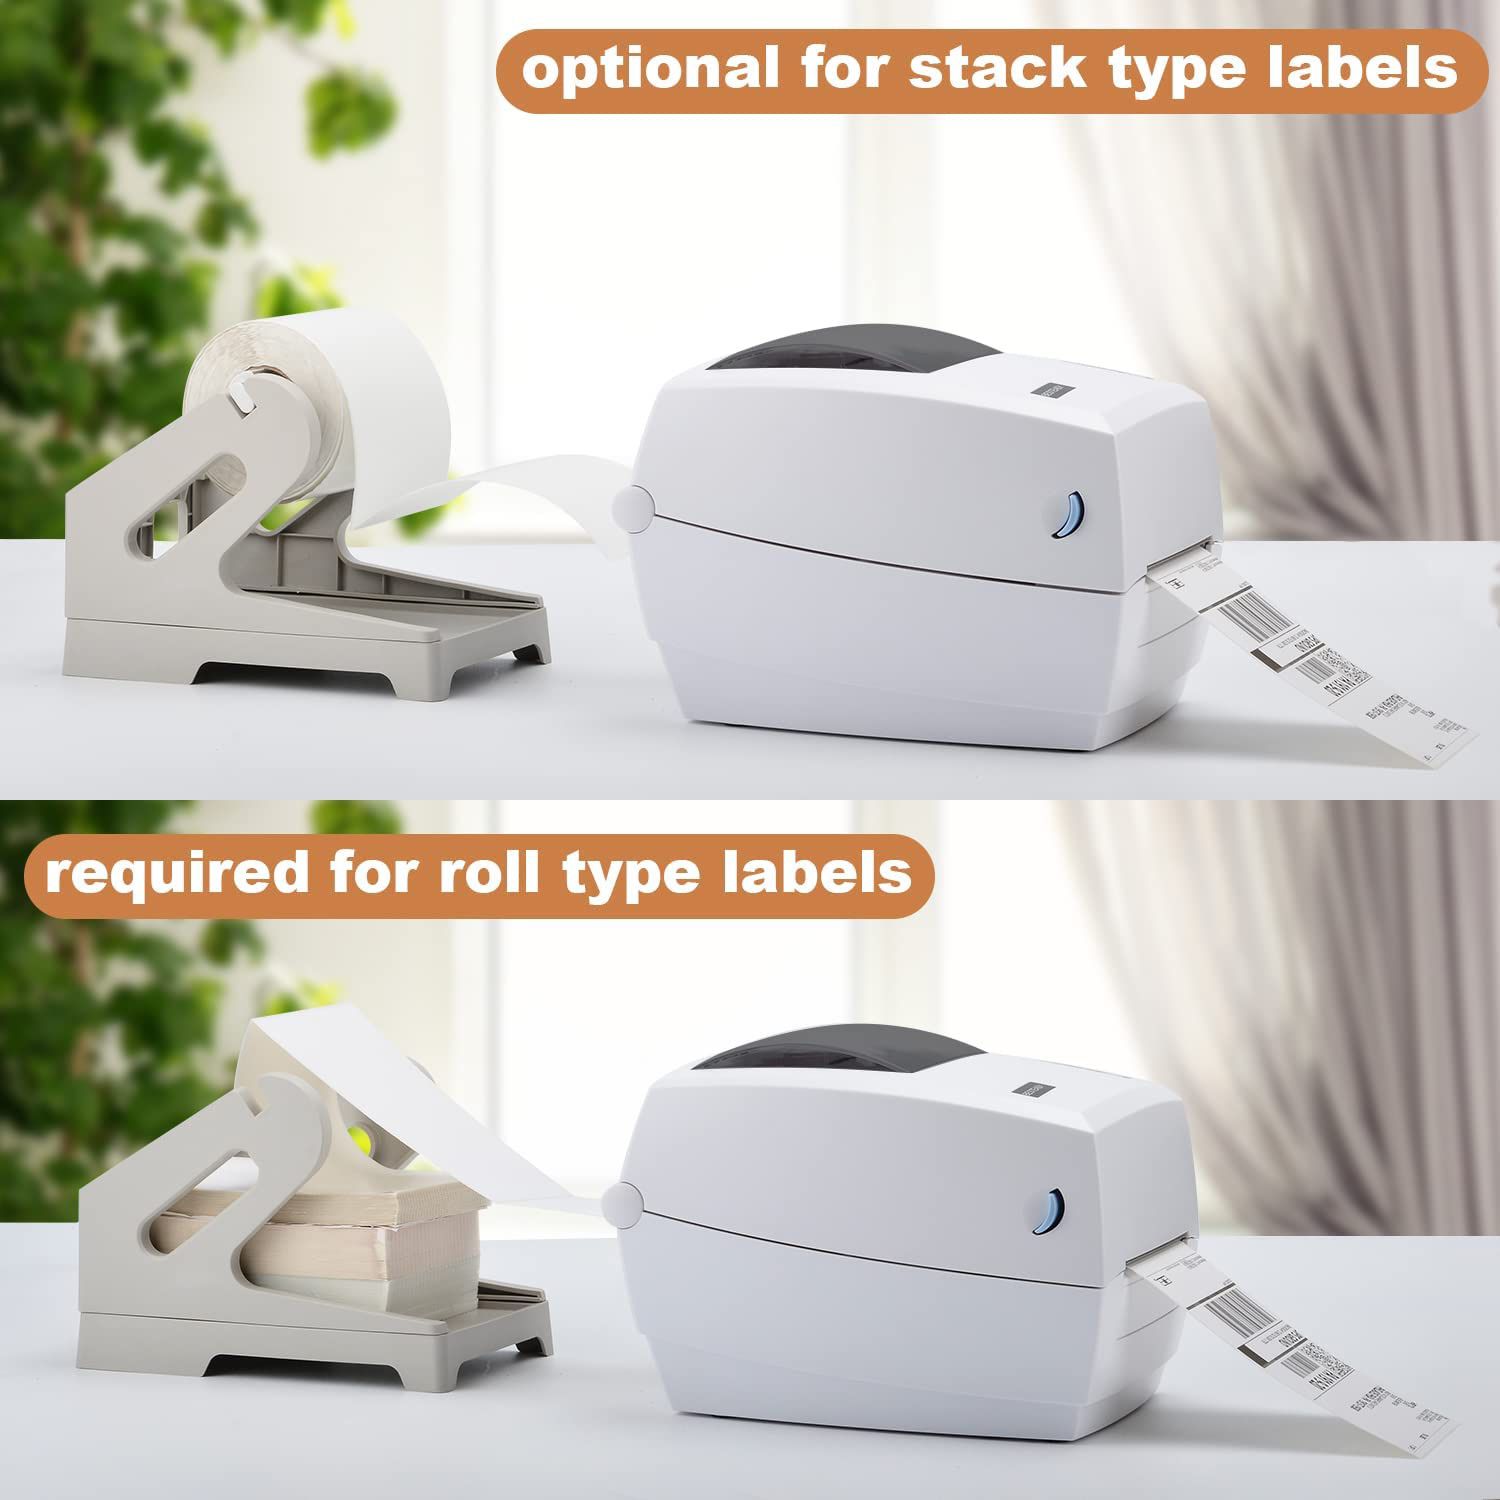 Shipping Label Printer, USPS Label Printer, 4x6 Thermal Printer for Shipping Labels, Commercial Grade Label Maker-High Speed & Clear Printing, Compati